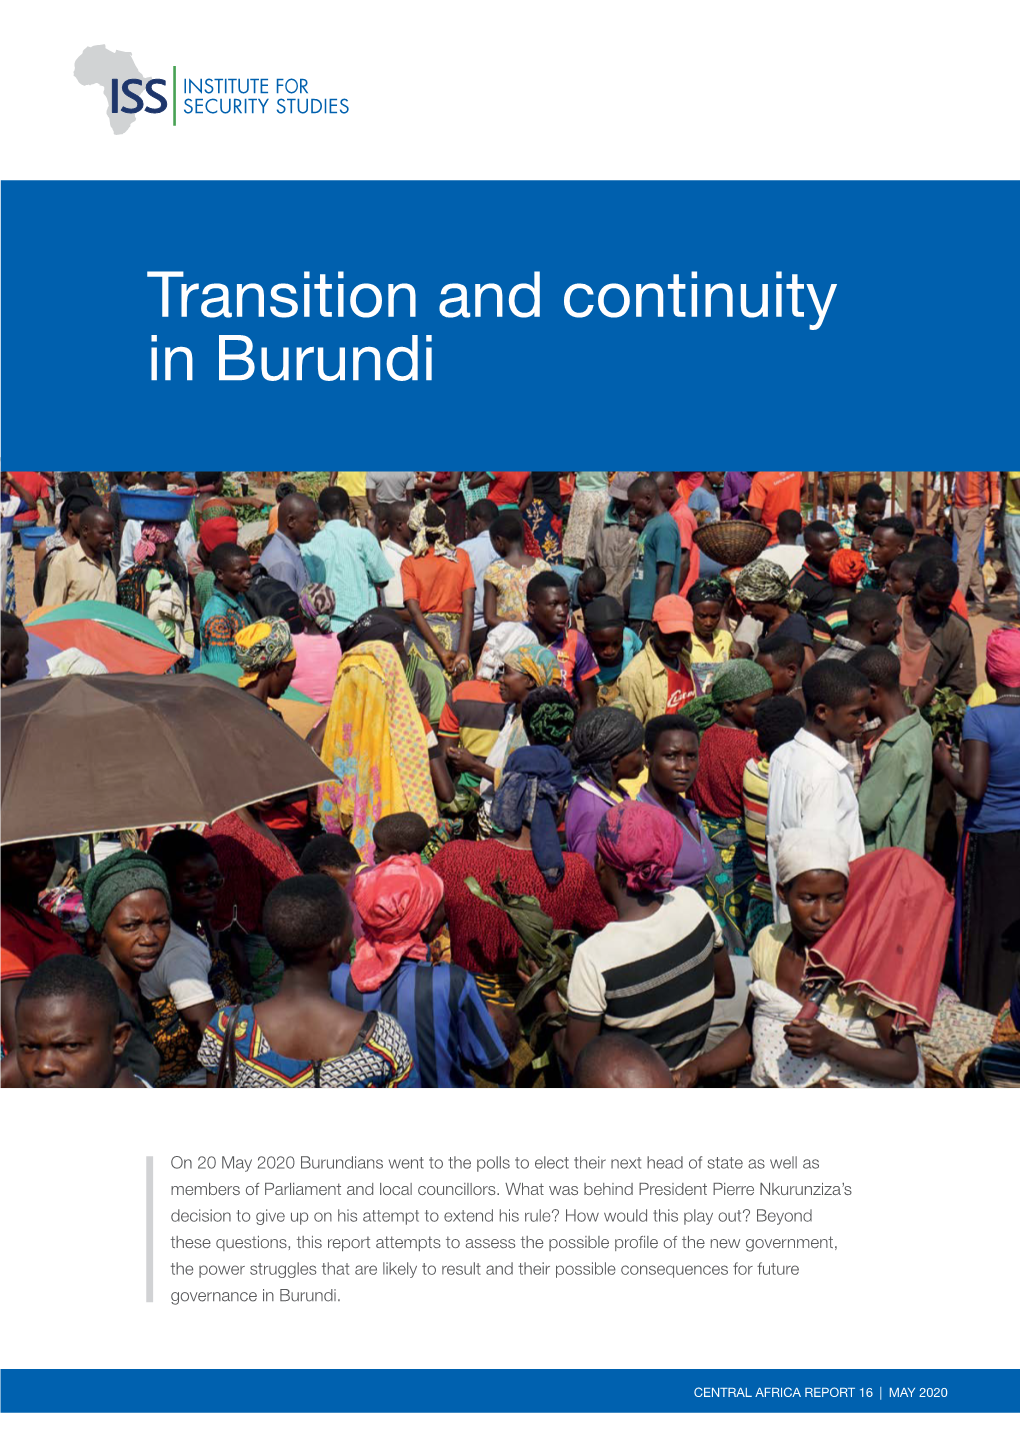 Transition and Continuity in Burundi